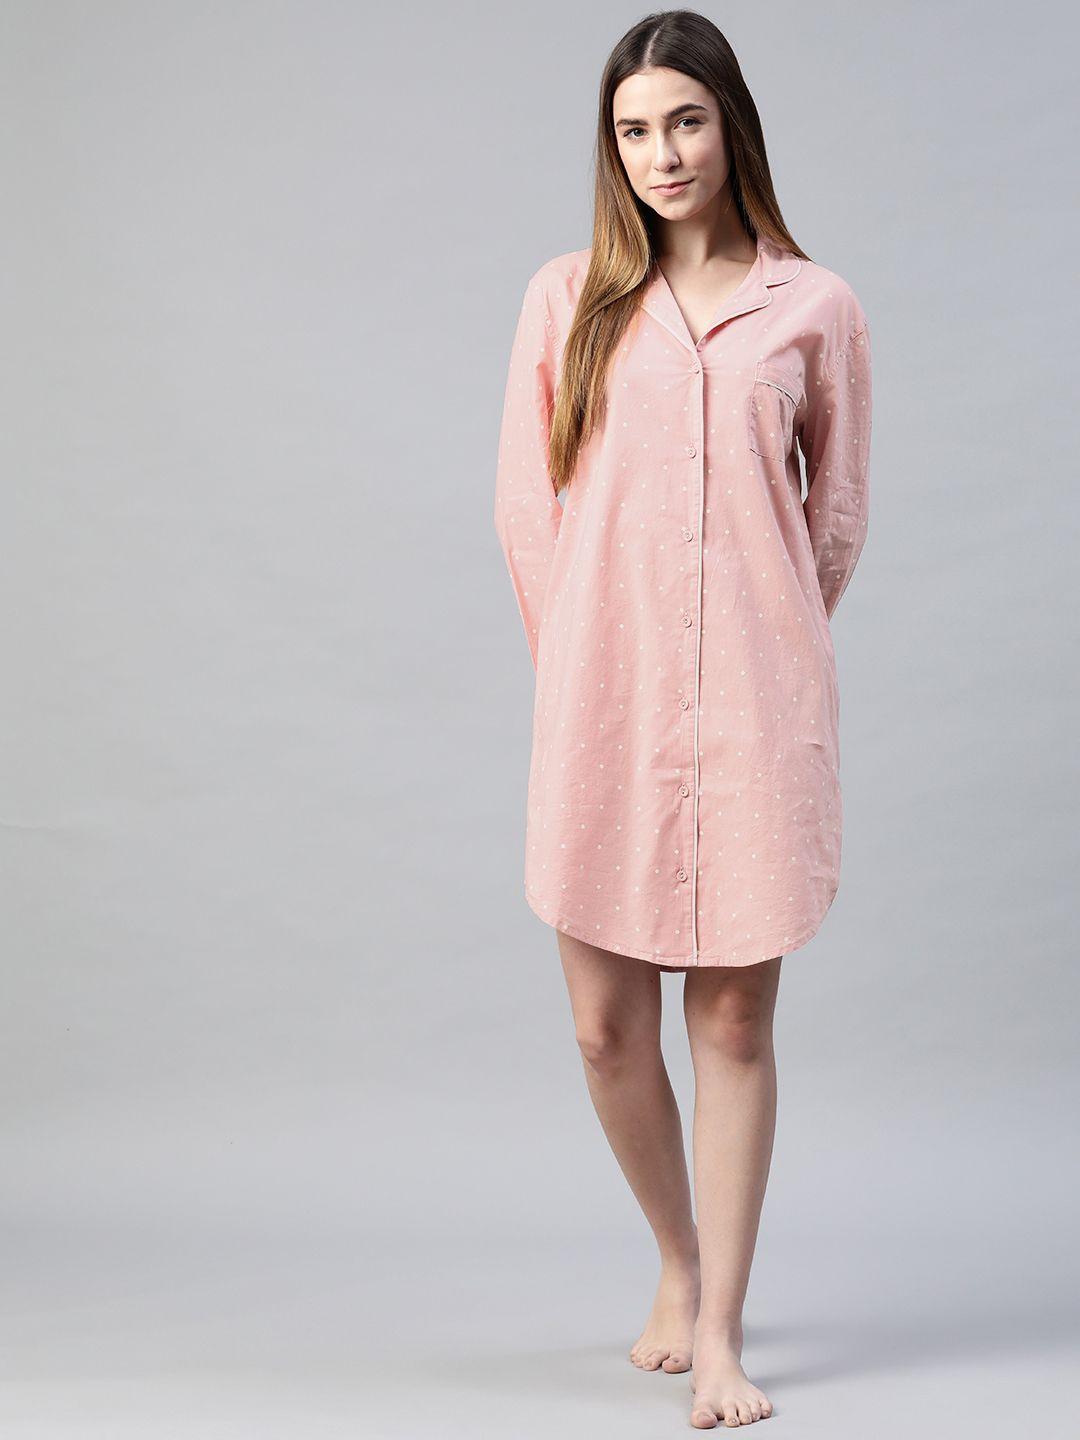 marks-&-spencer-pink-&-white-printed-cotton-nightdress